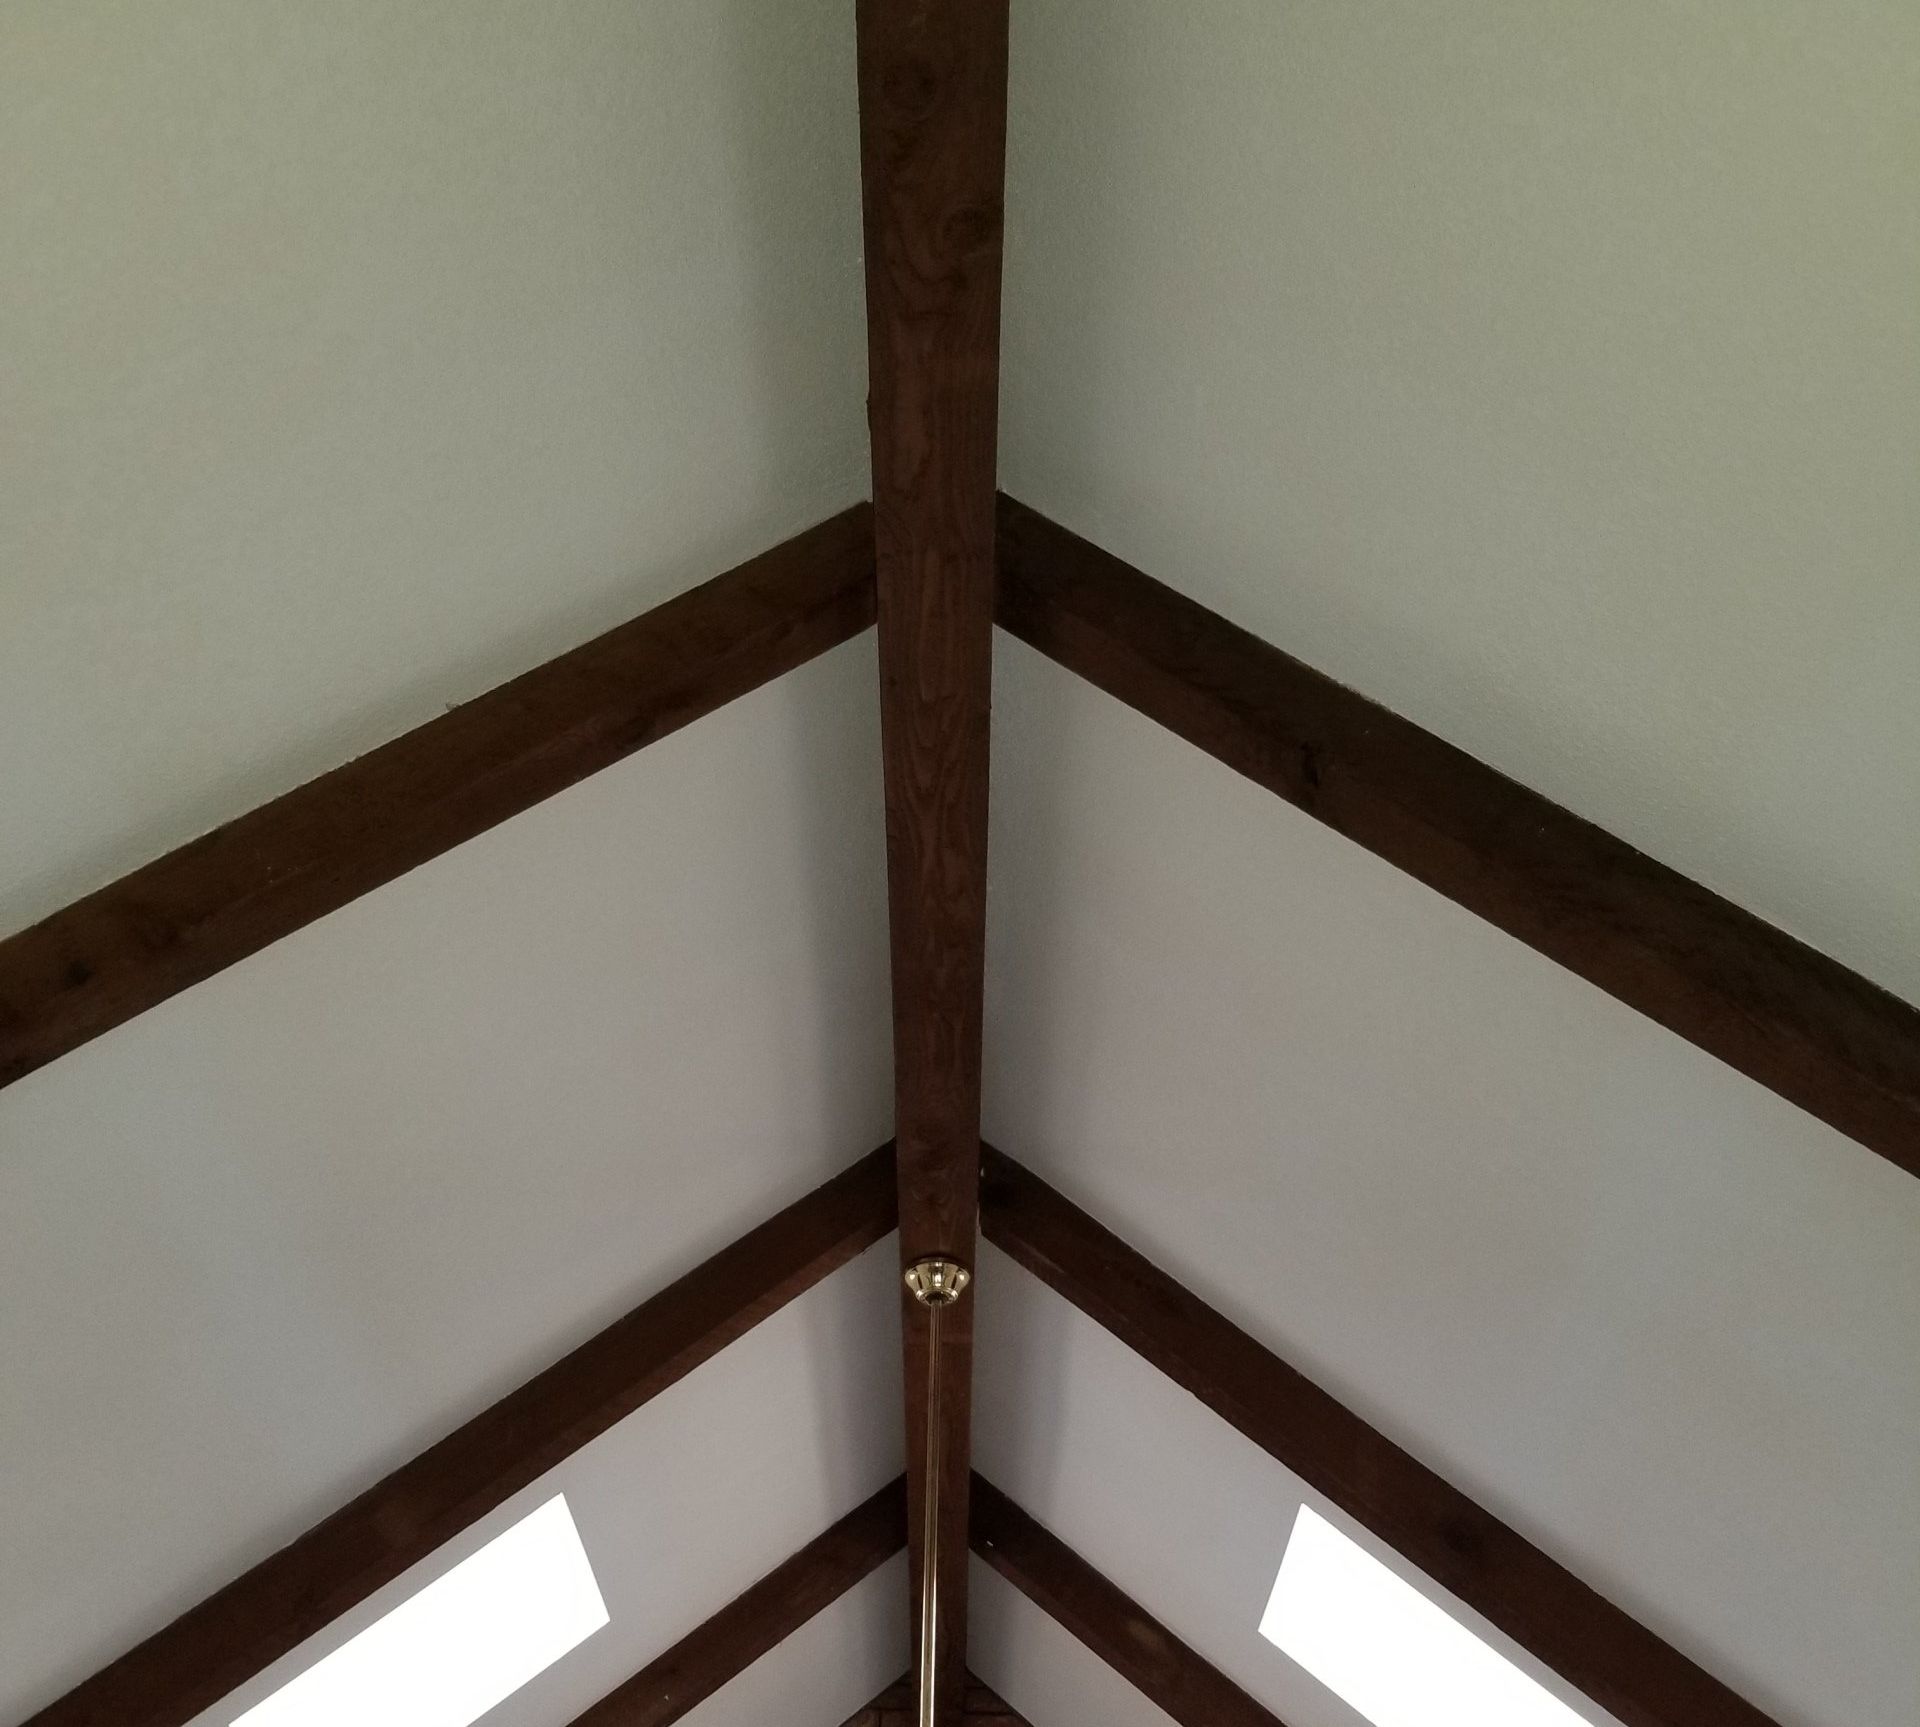 A vaulted ceiling, freshly painted white with dark wooden beams